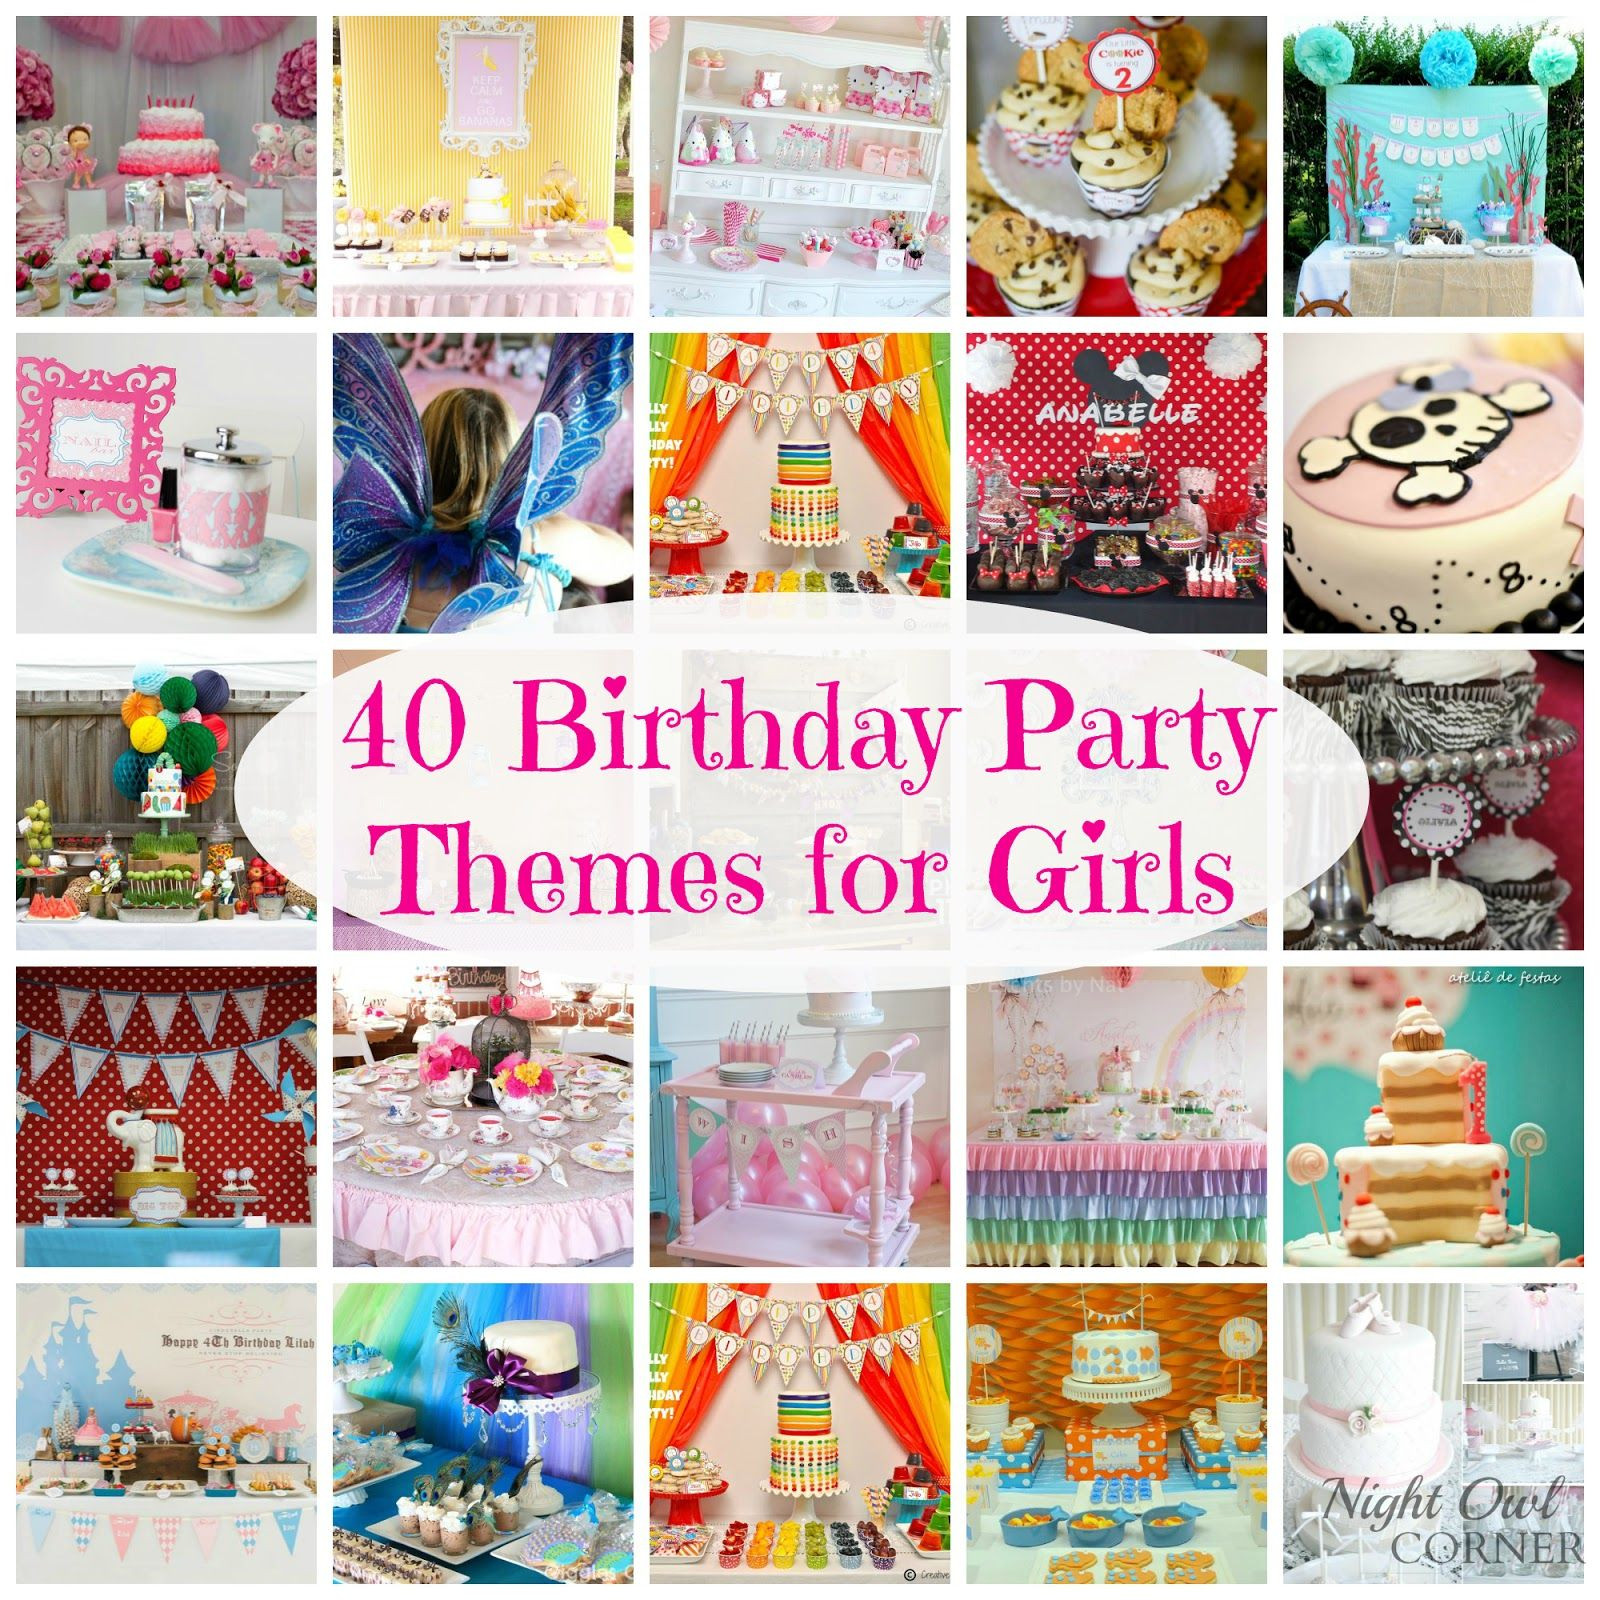 Birthday Party Ideas For 9 Yr Old Girl
 Night Owl Corner 40 Birthday Party Themes for Girls